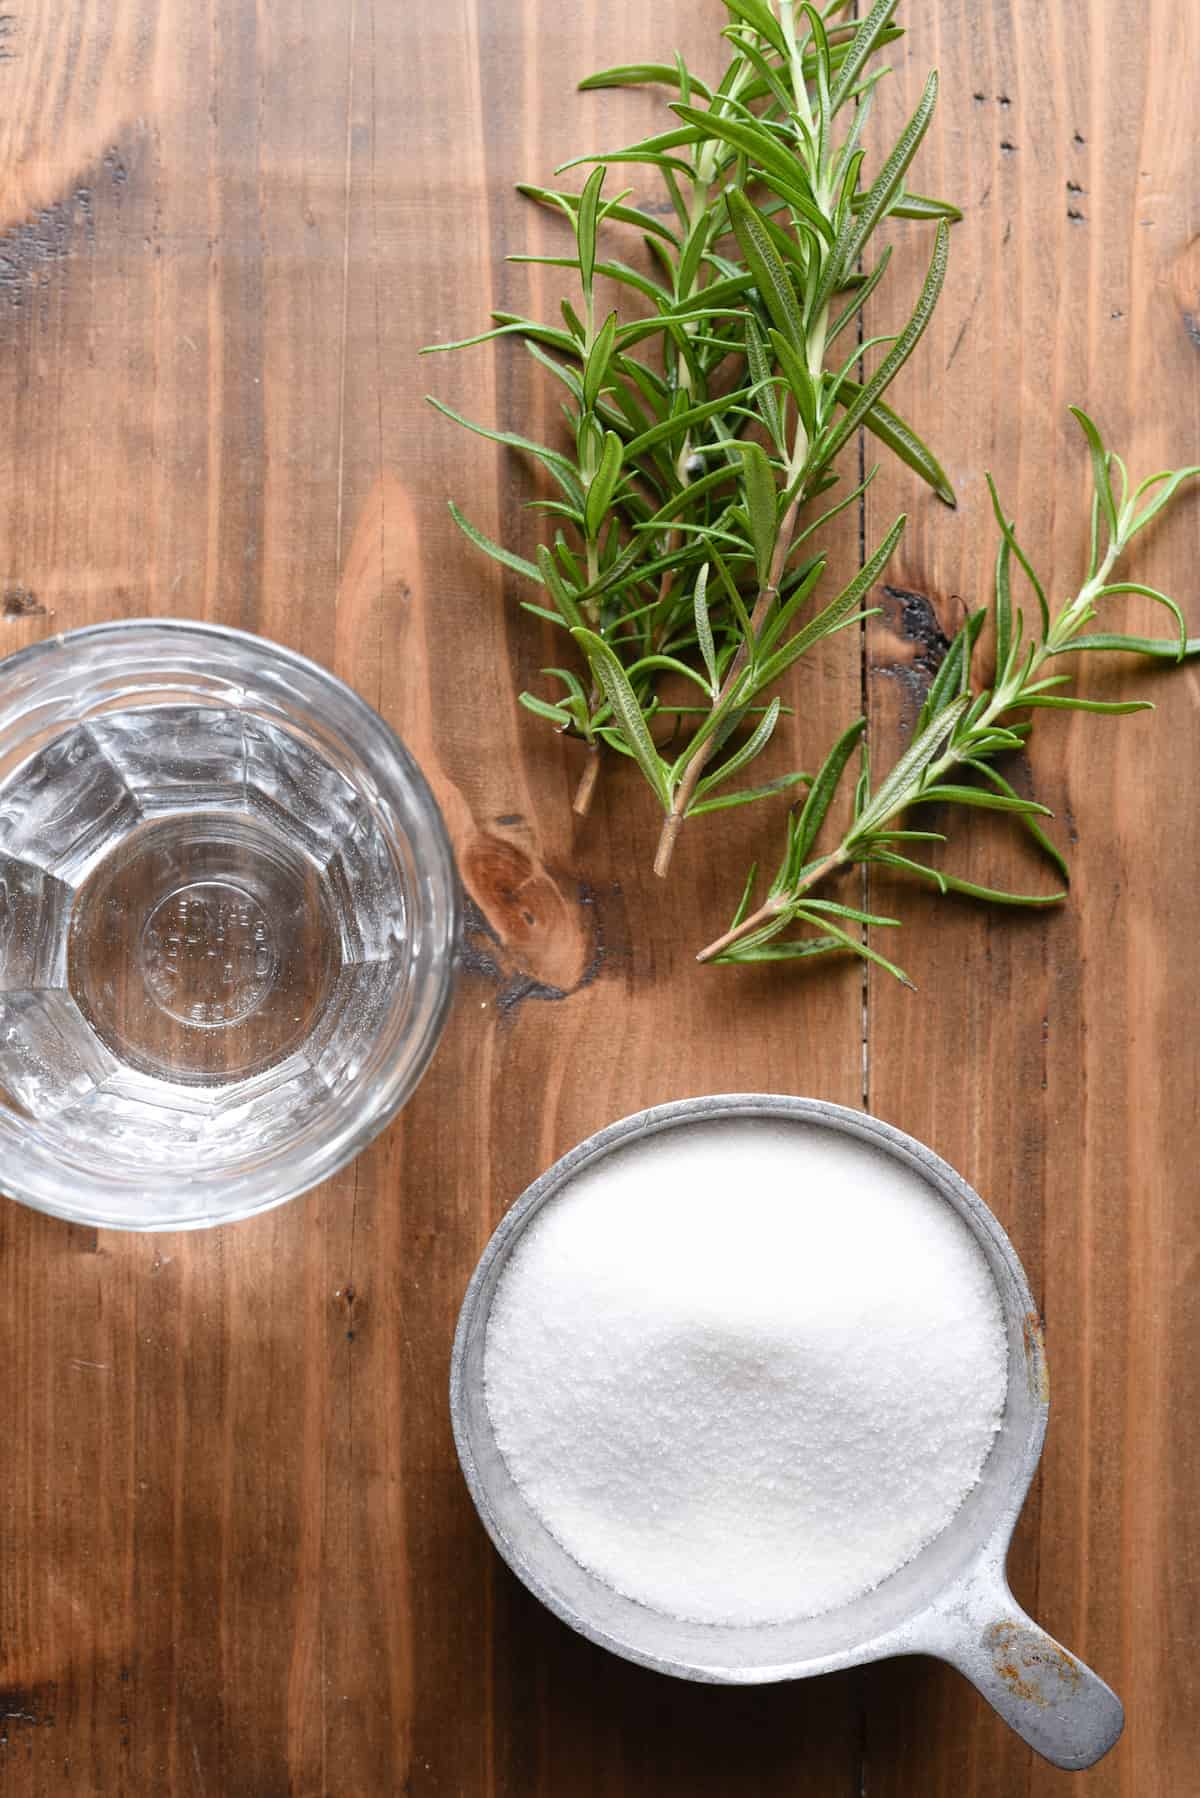 Overhead photo of cup of sugar, glass of water and rosemary sprigs on wooden table.